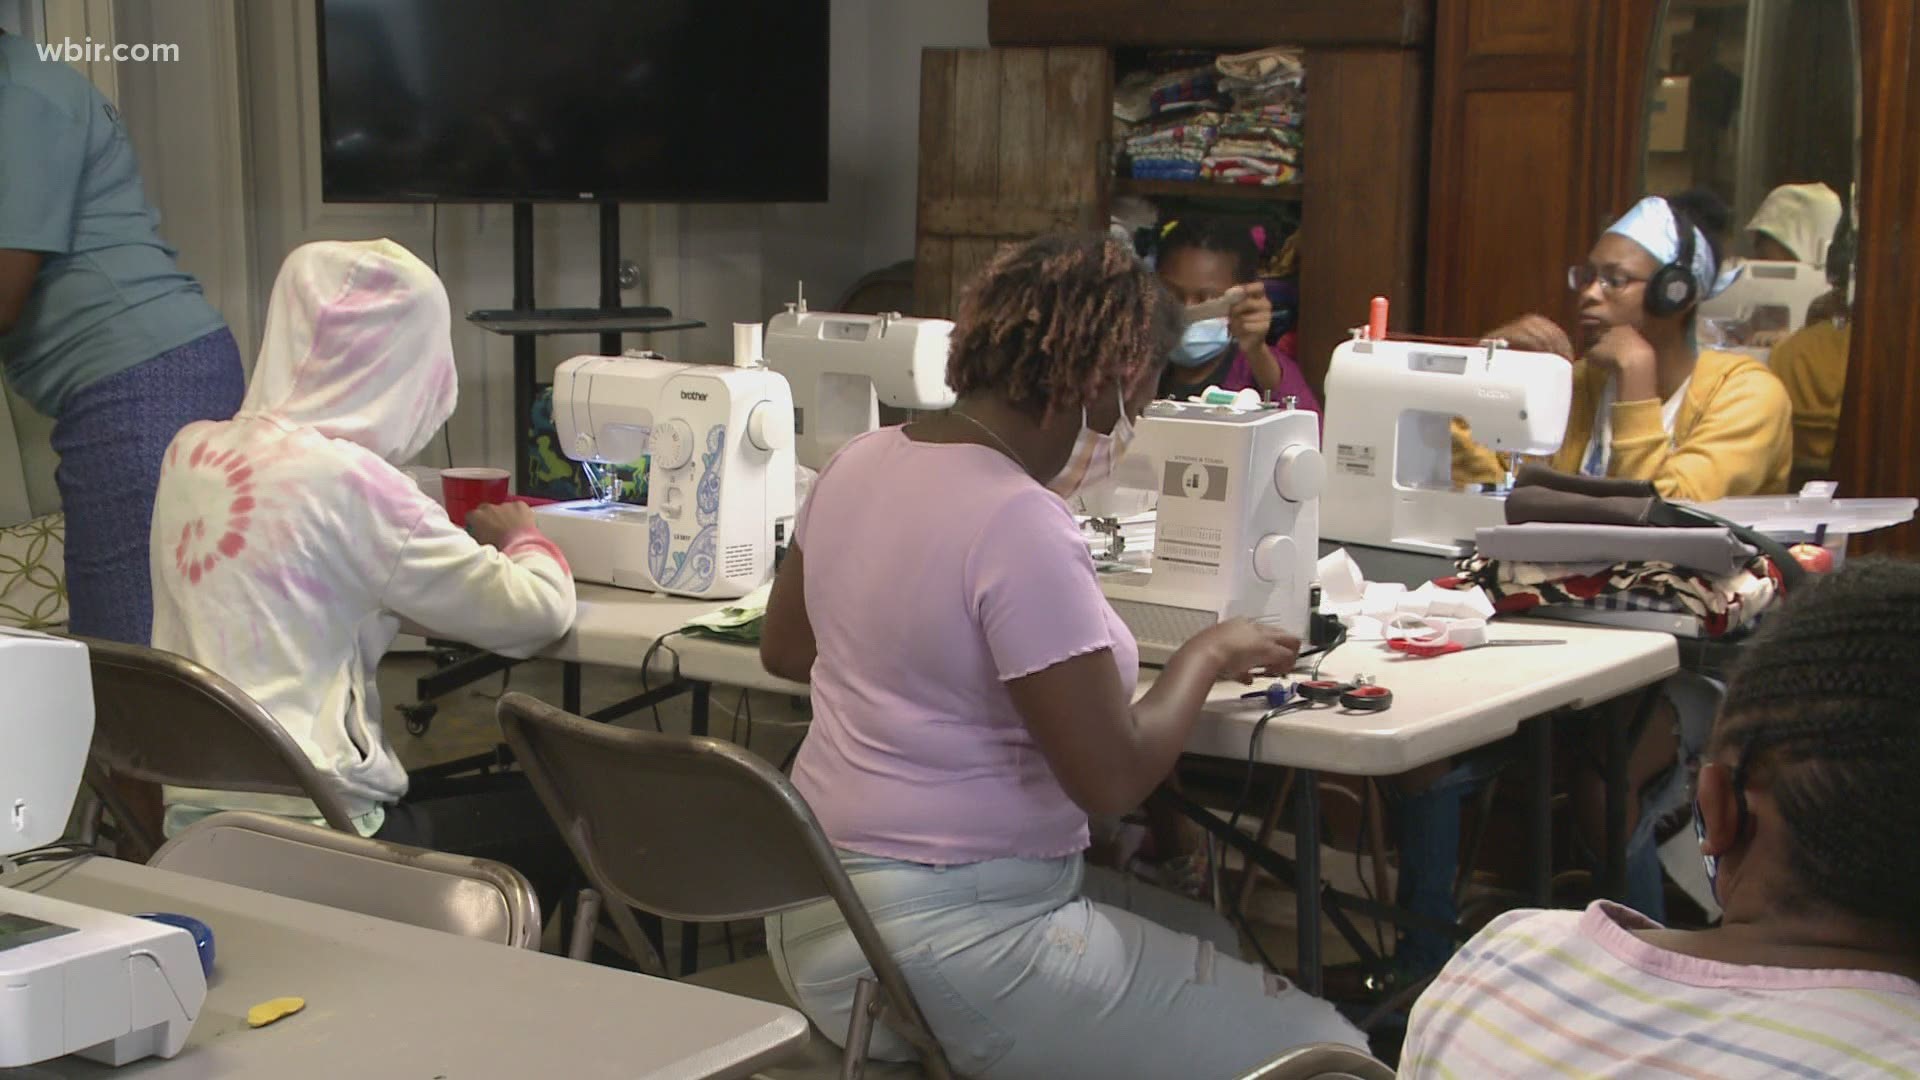 Knoxville students are getting the chance to learn how to create and sell their own projects thanks to "Sew it Sell it."